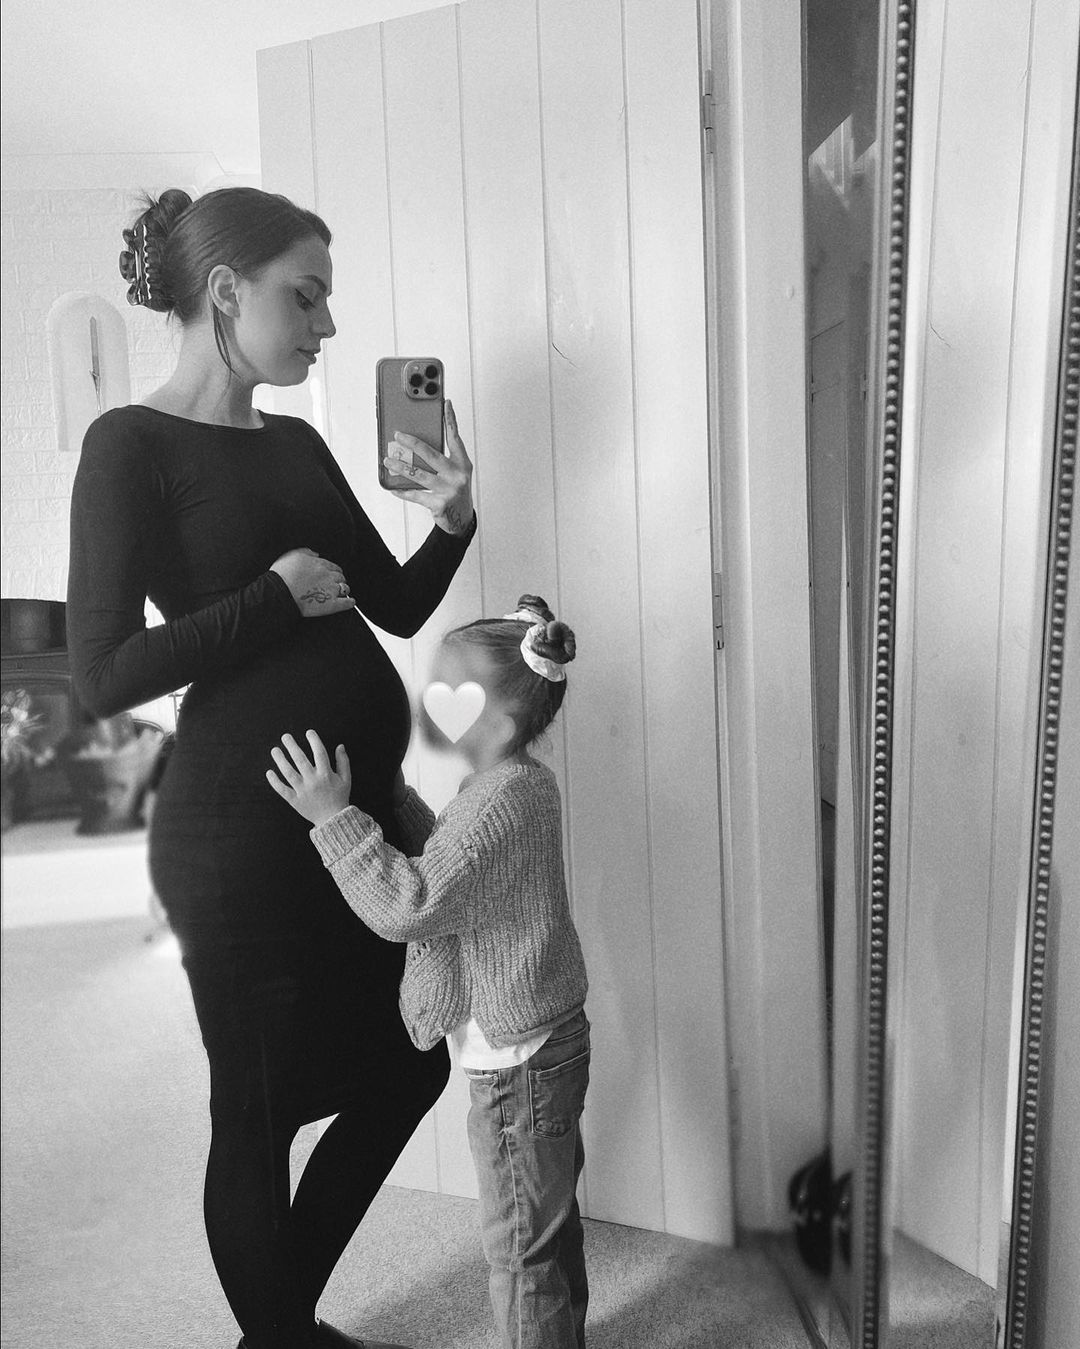 X Factor legend reveals first picture of her baby bump after bombshell news she is pregnant